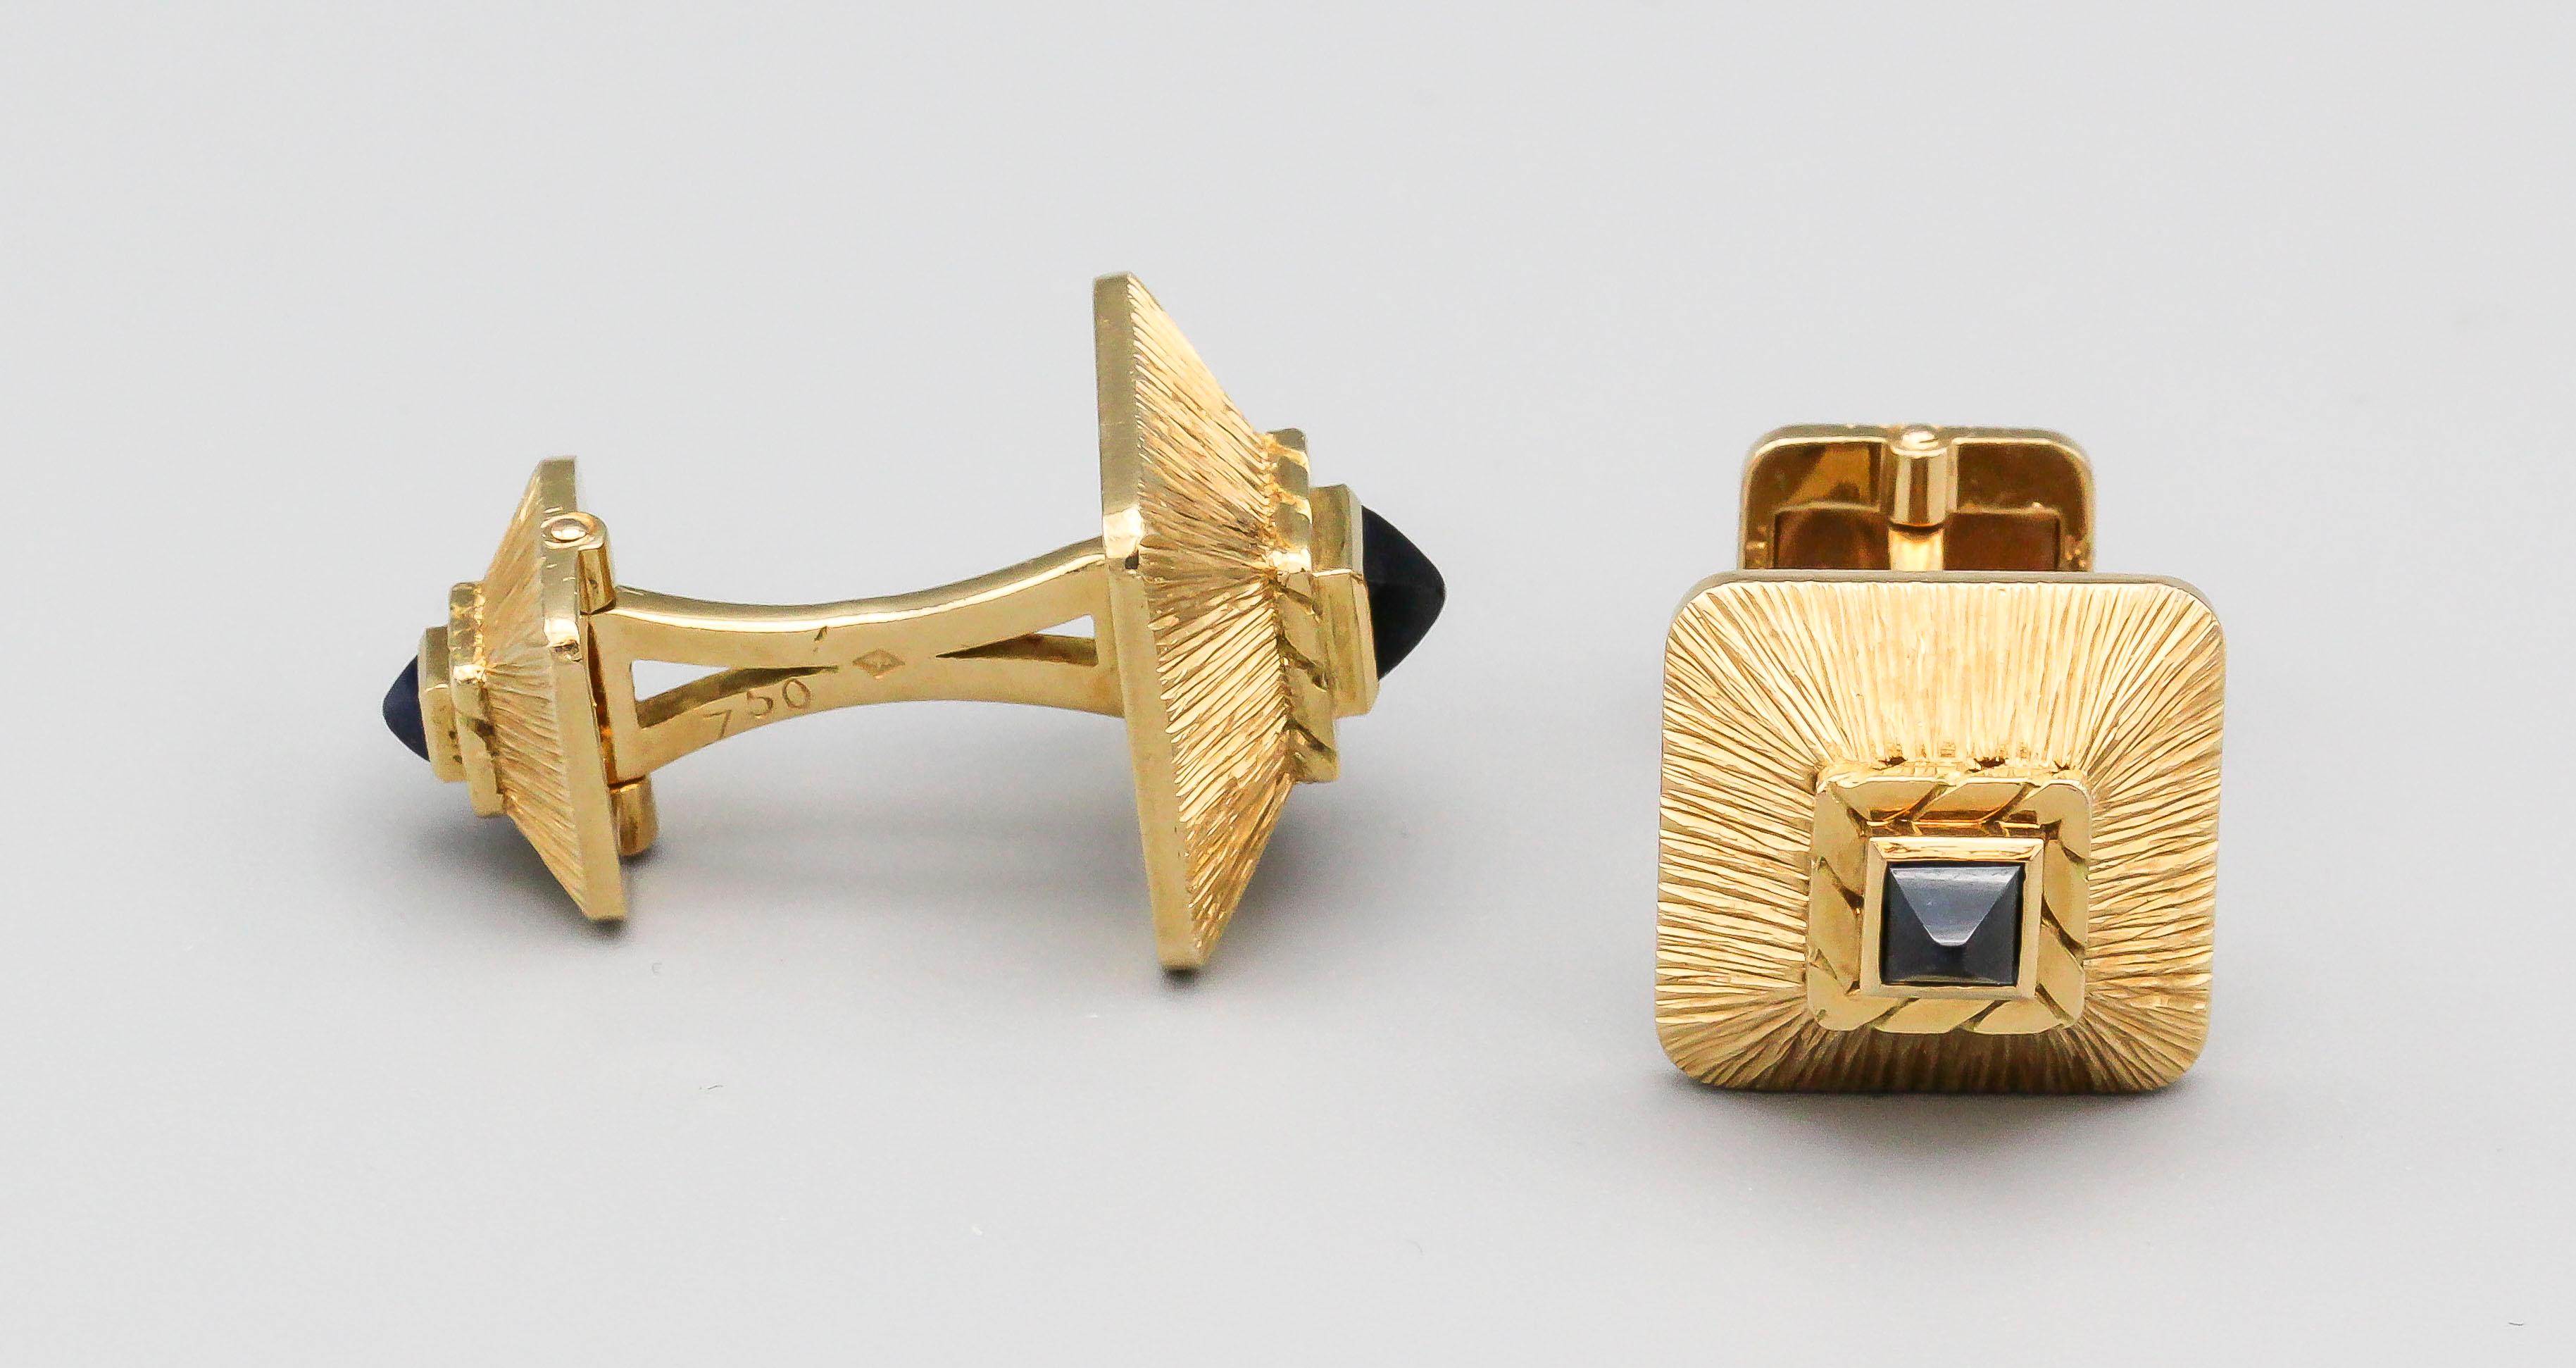 Rare and unusual 18k yellow gold and sugarloaf cabochon sapphire cufflinks by Van Cleef & Arpels, circa 1950-60s.  Of French origin.

Hallmarks:  VCA, 750, reference numbers, French 18k gold assay marks, maker's mark.